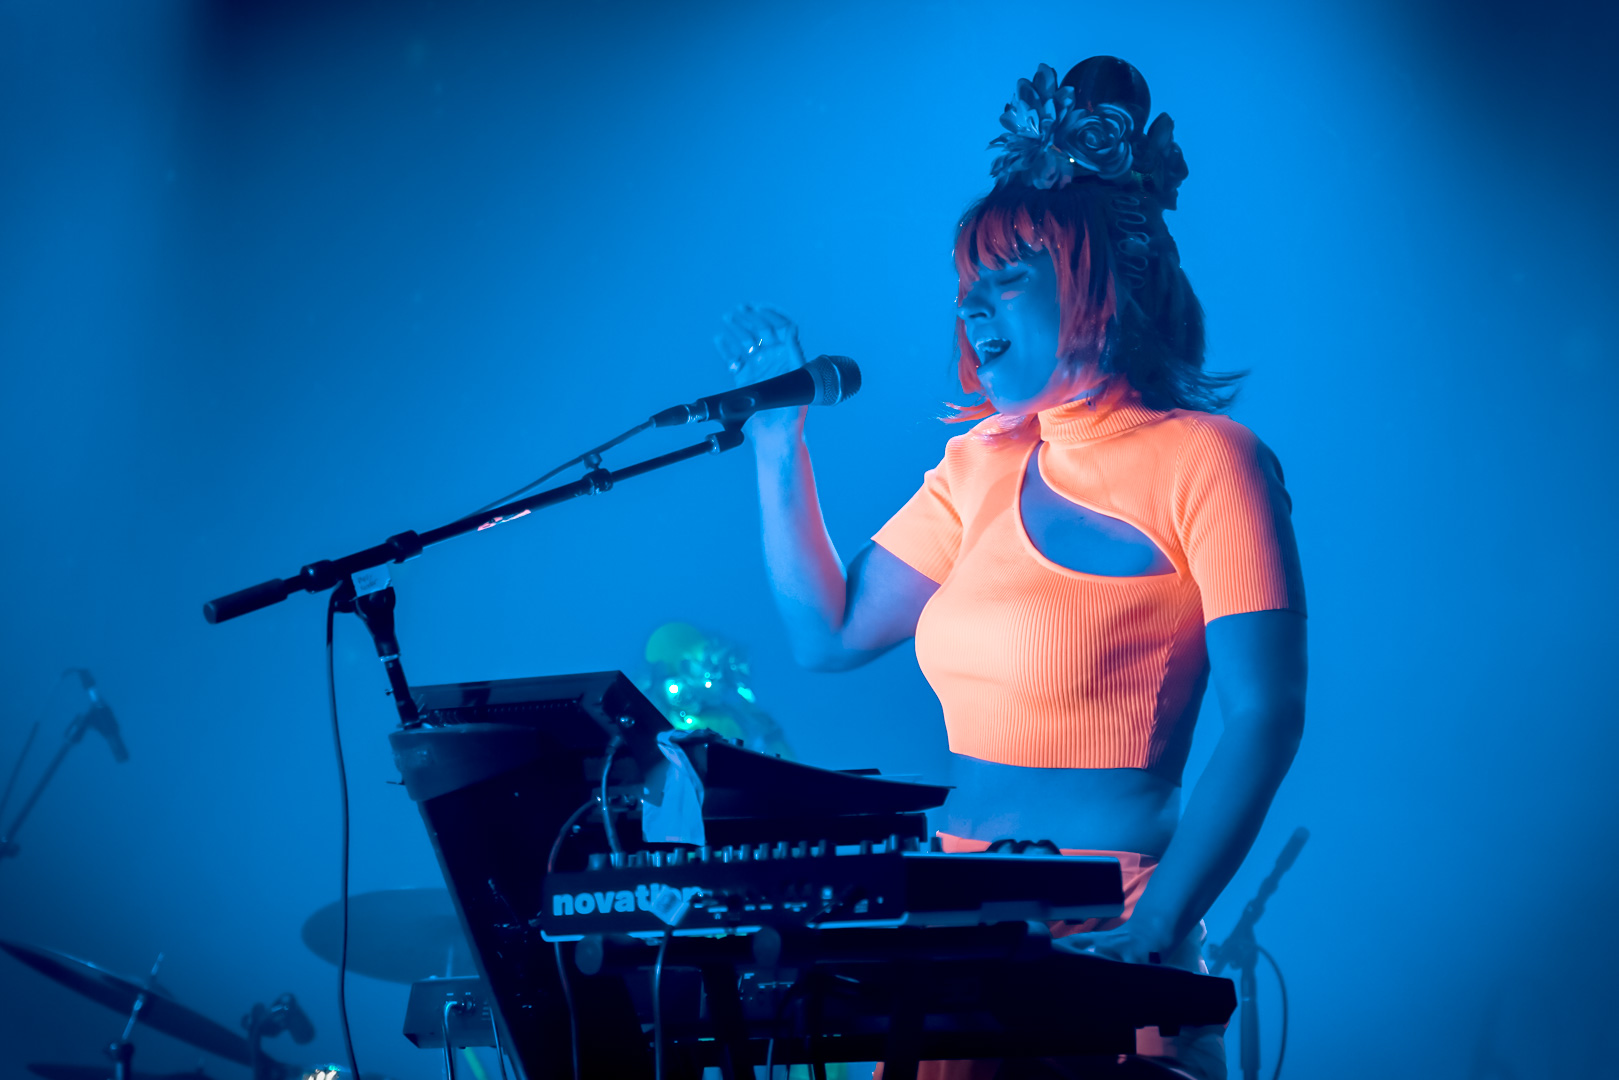 A woman in orange neon outfit playing keyboard and singing